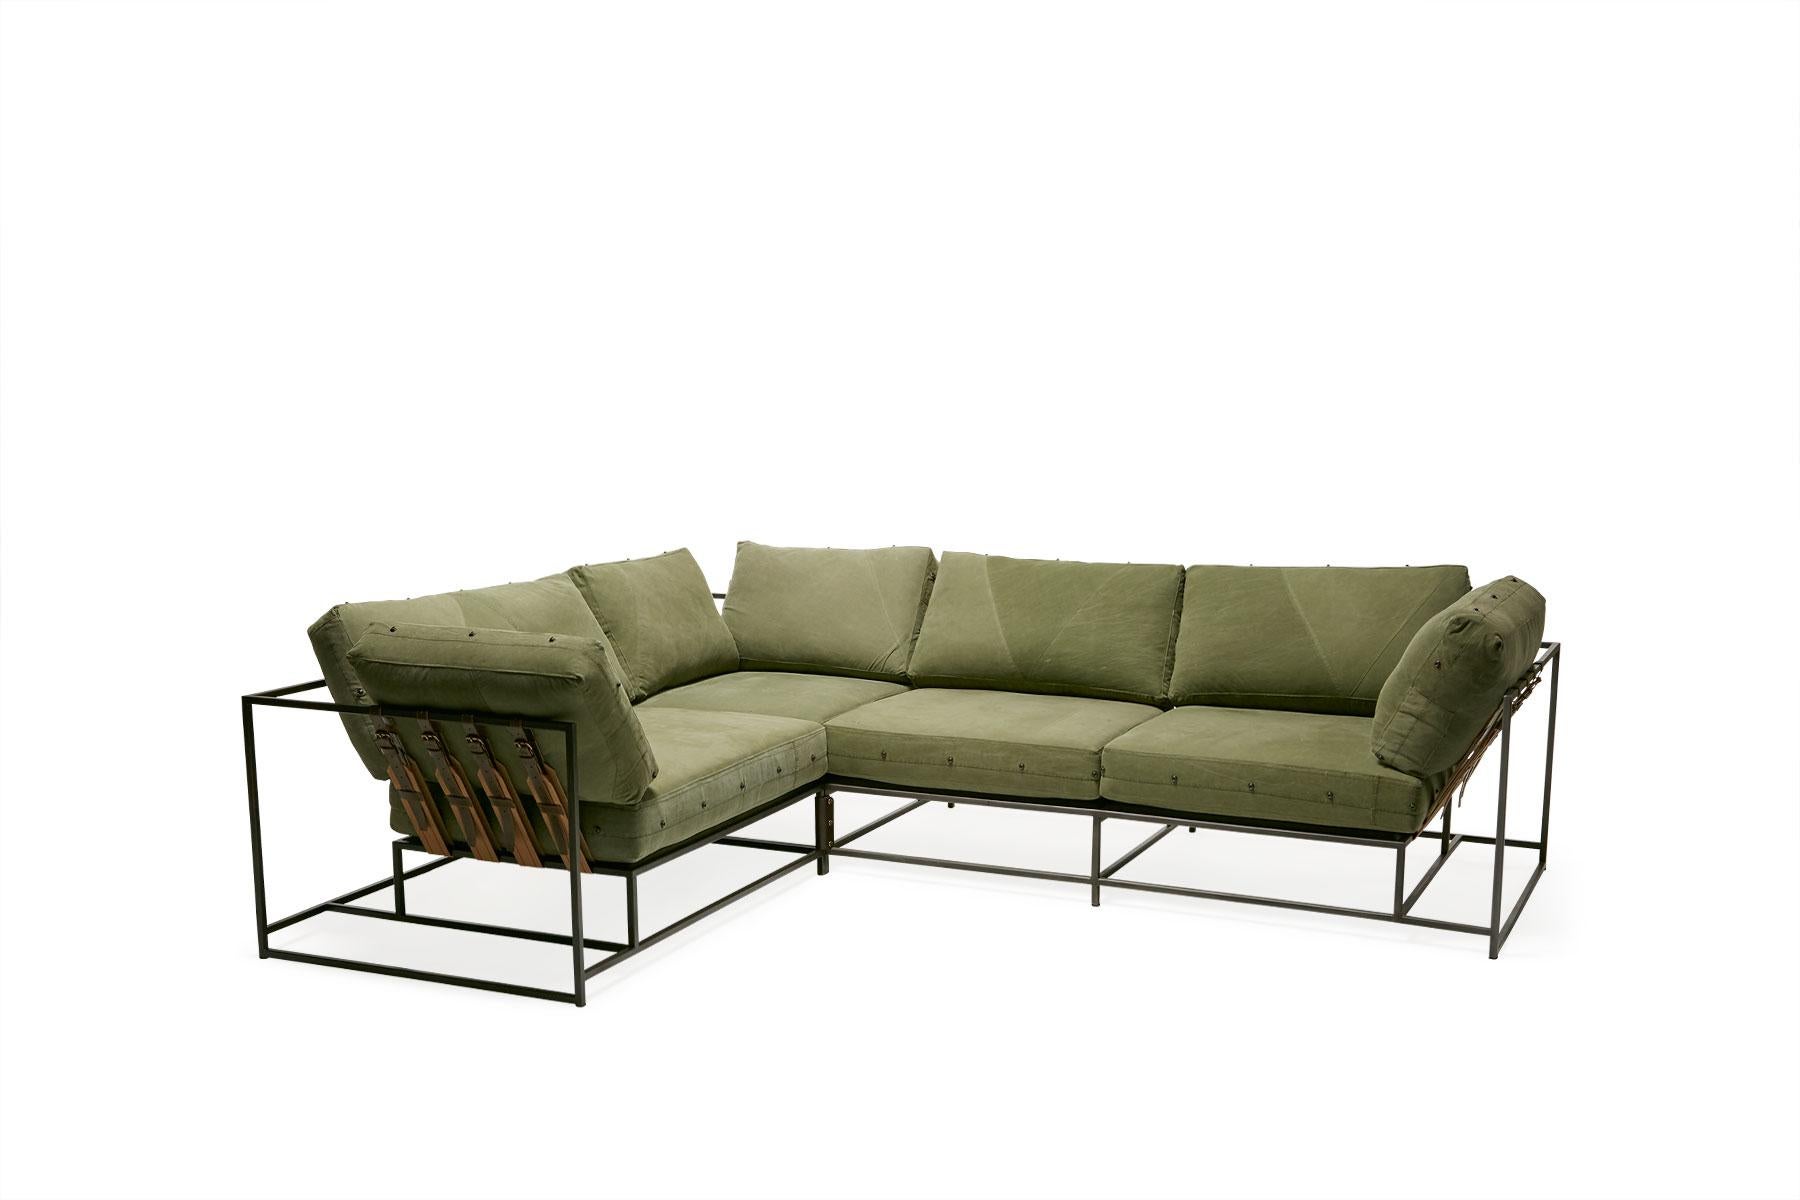 Metalwork Military Canvas & Blackened Steel Medium Sectional For Sale